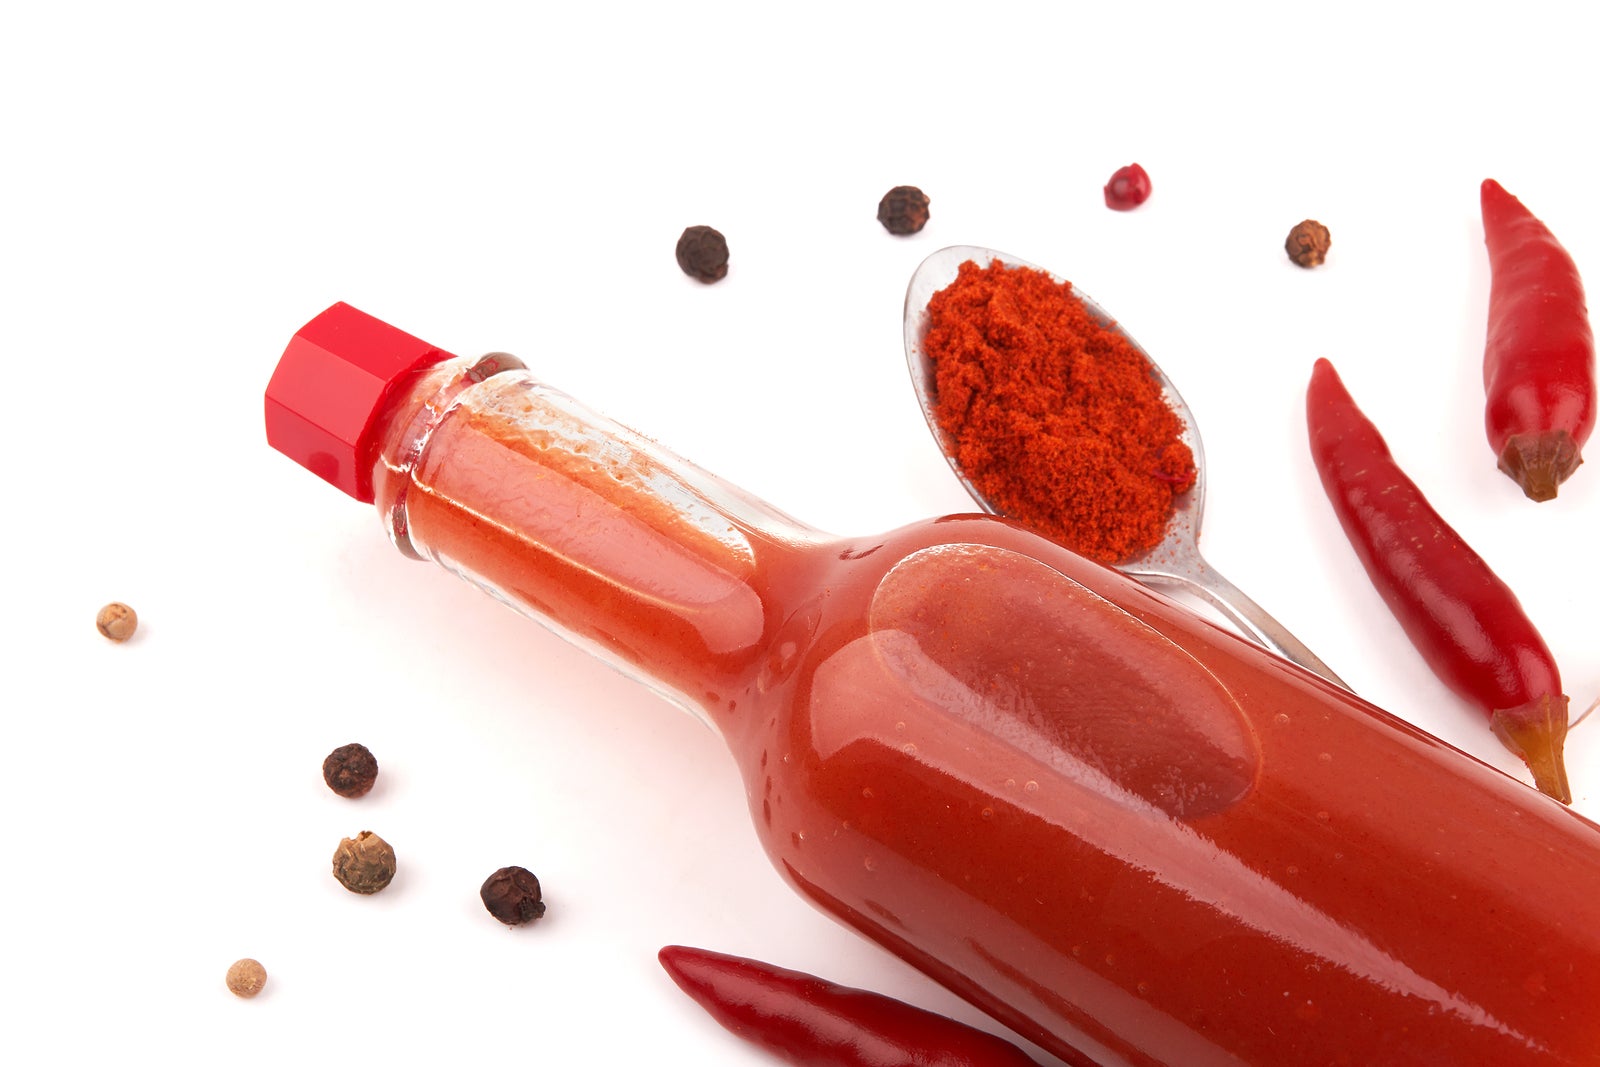 6 Essential Things to Consider When Starting a Hot Sauce Business